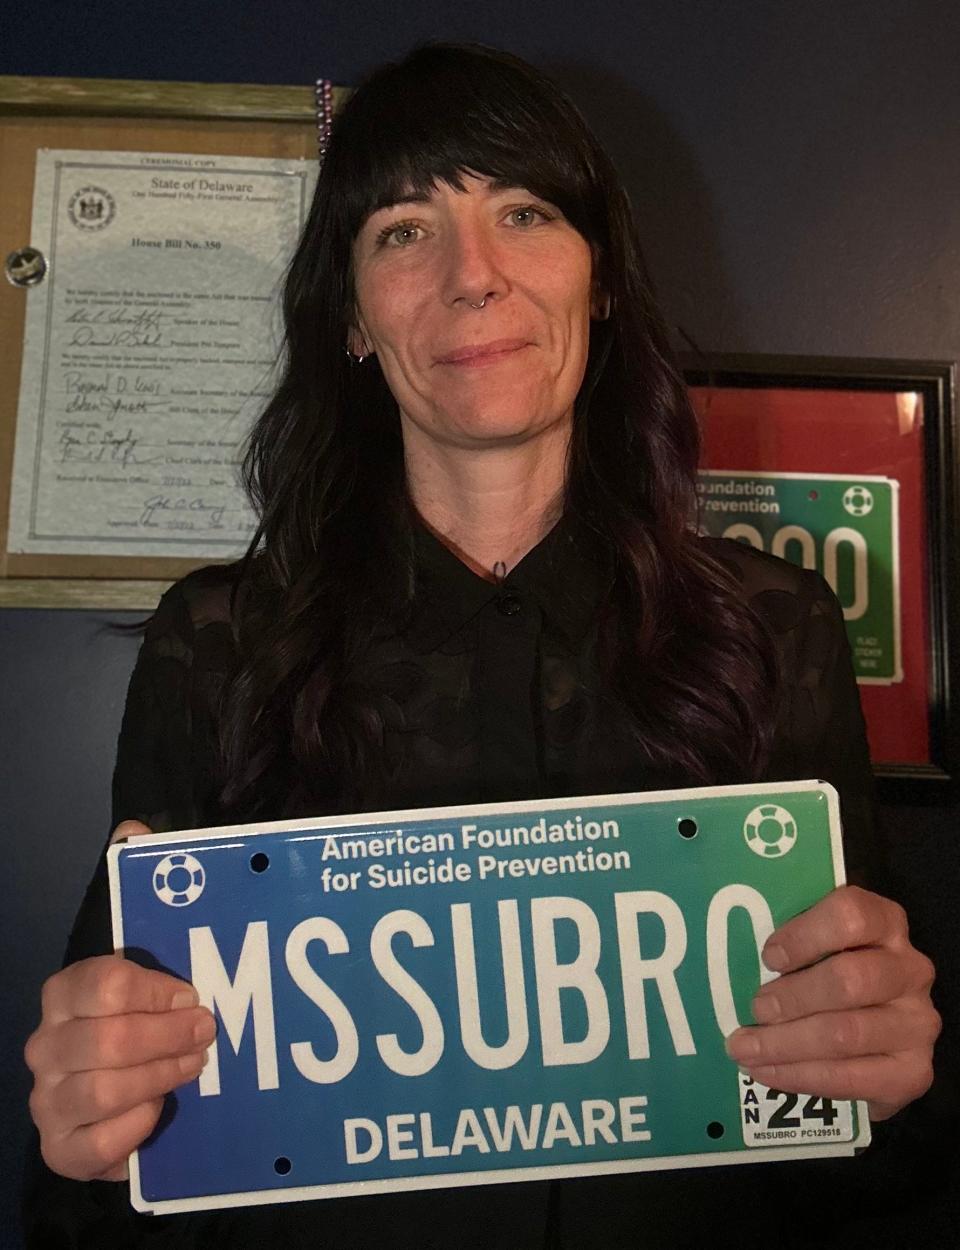 Delaware resident Jennifer Staley with her custom American Foundation for Suicide Prevention license plate in memory of her brother-in-law who died by suicide in November 2020.